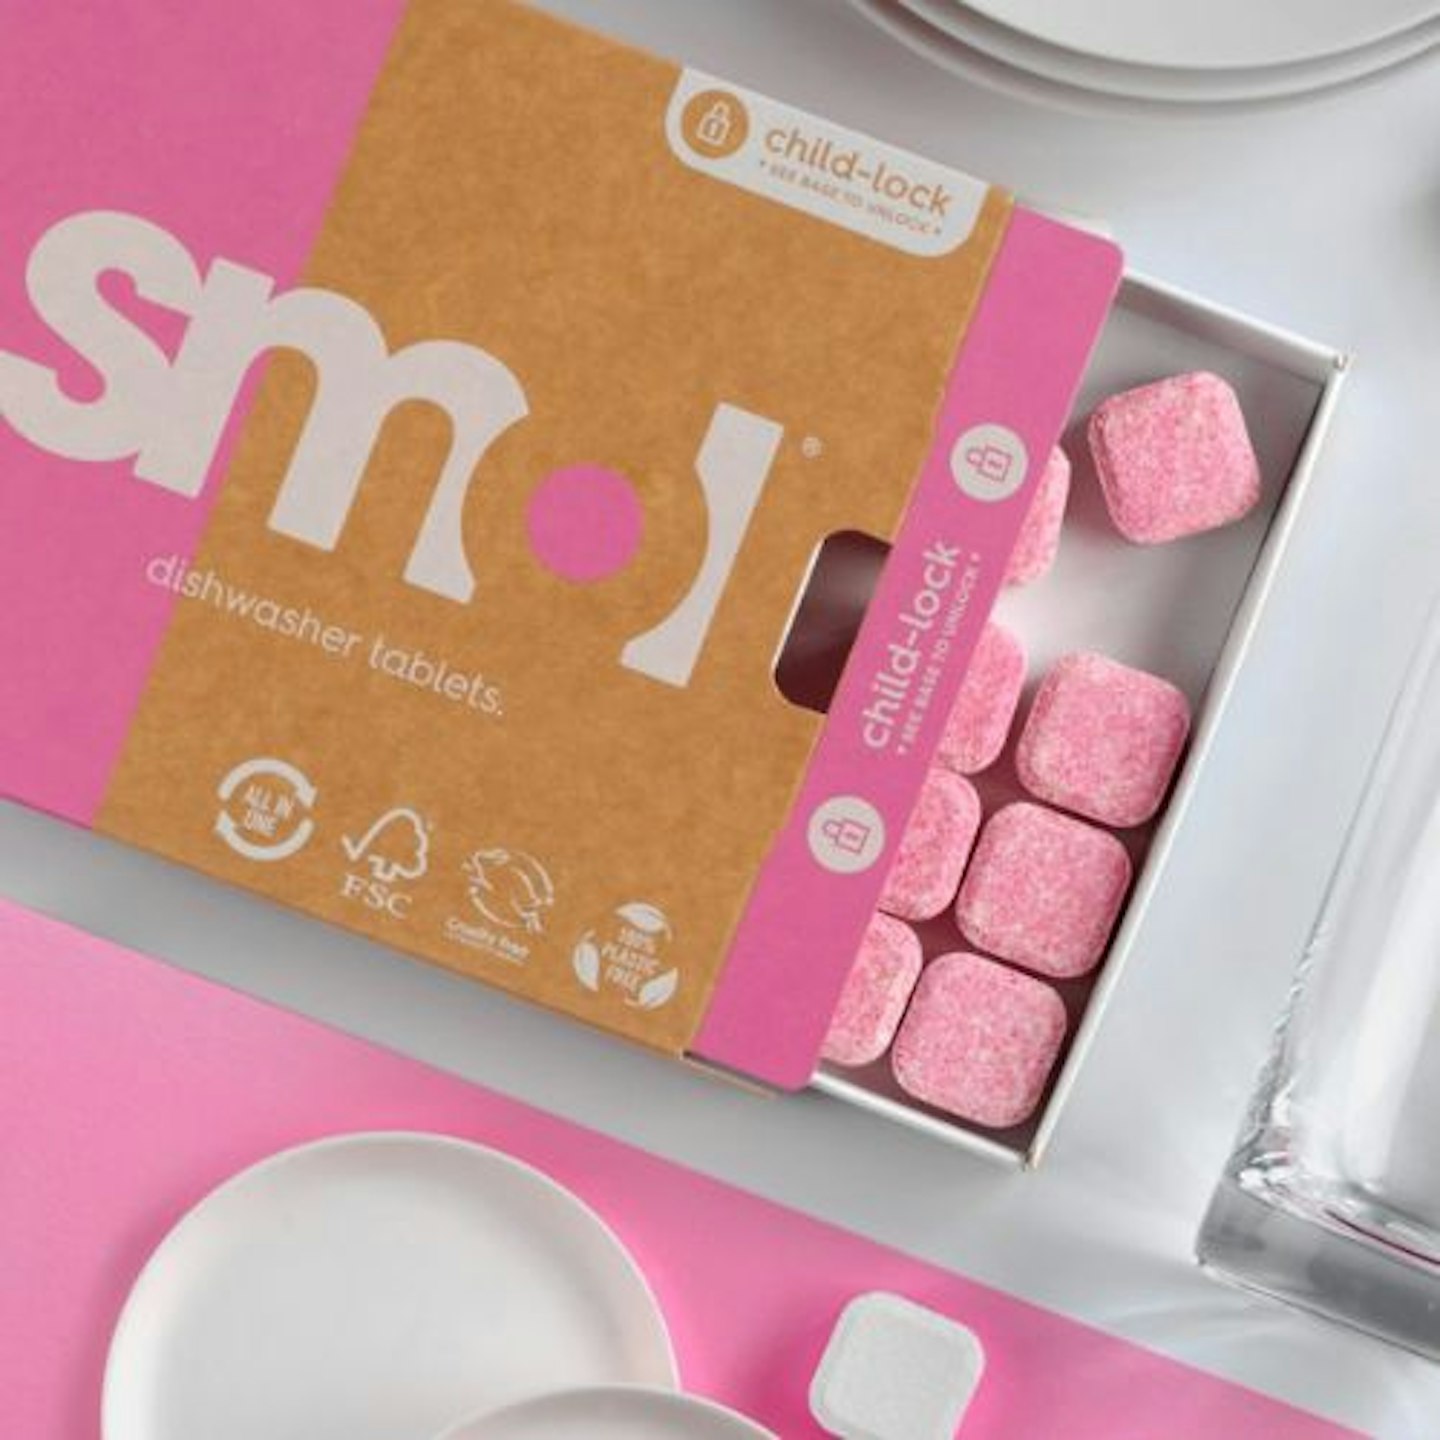 best-eco-cleaning-products-kitchen-smol-dishwasher-tablet-uk